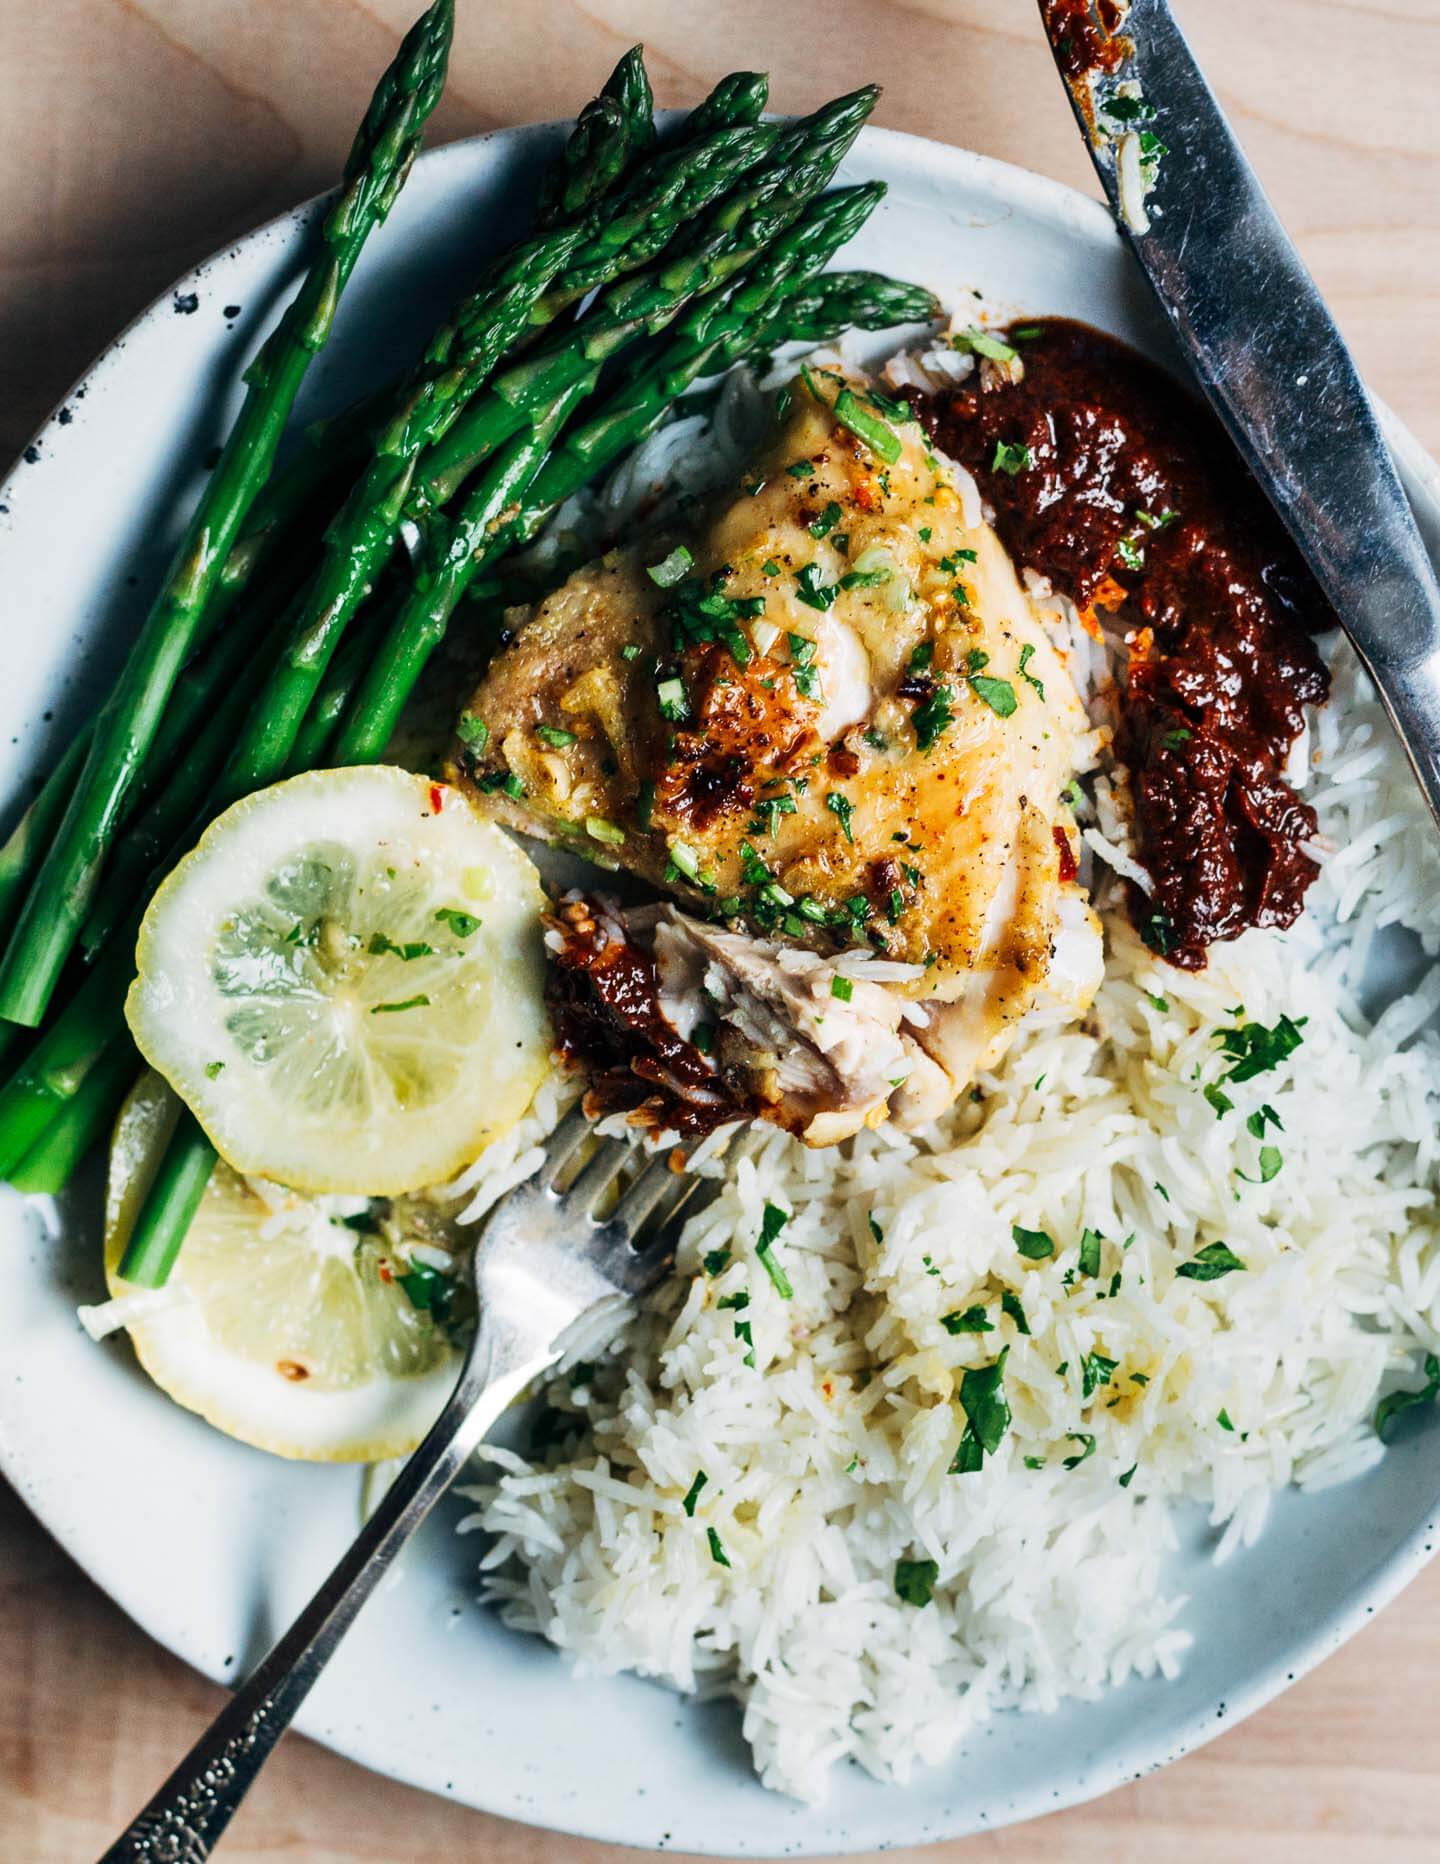 A plate with a bite of chicken on a fork with ice, harissa, and asparagus